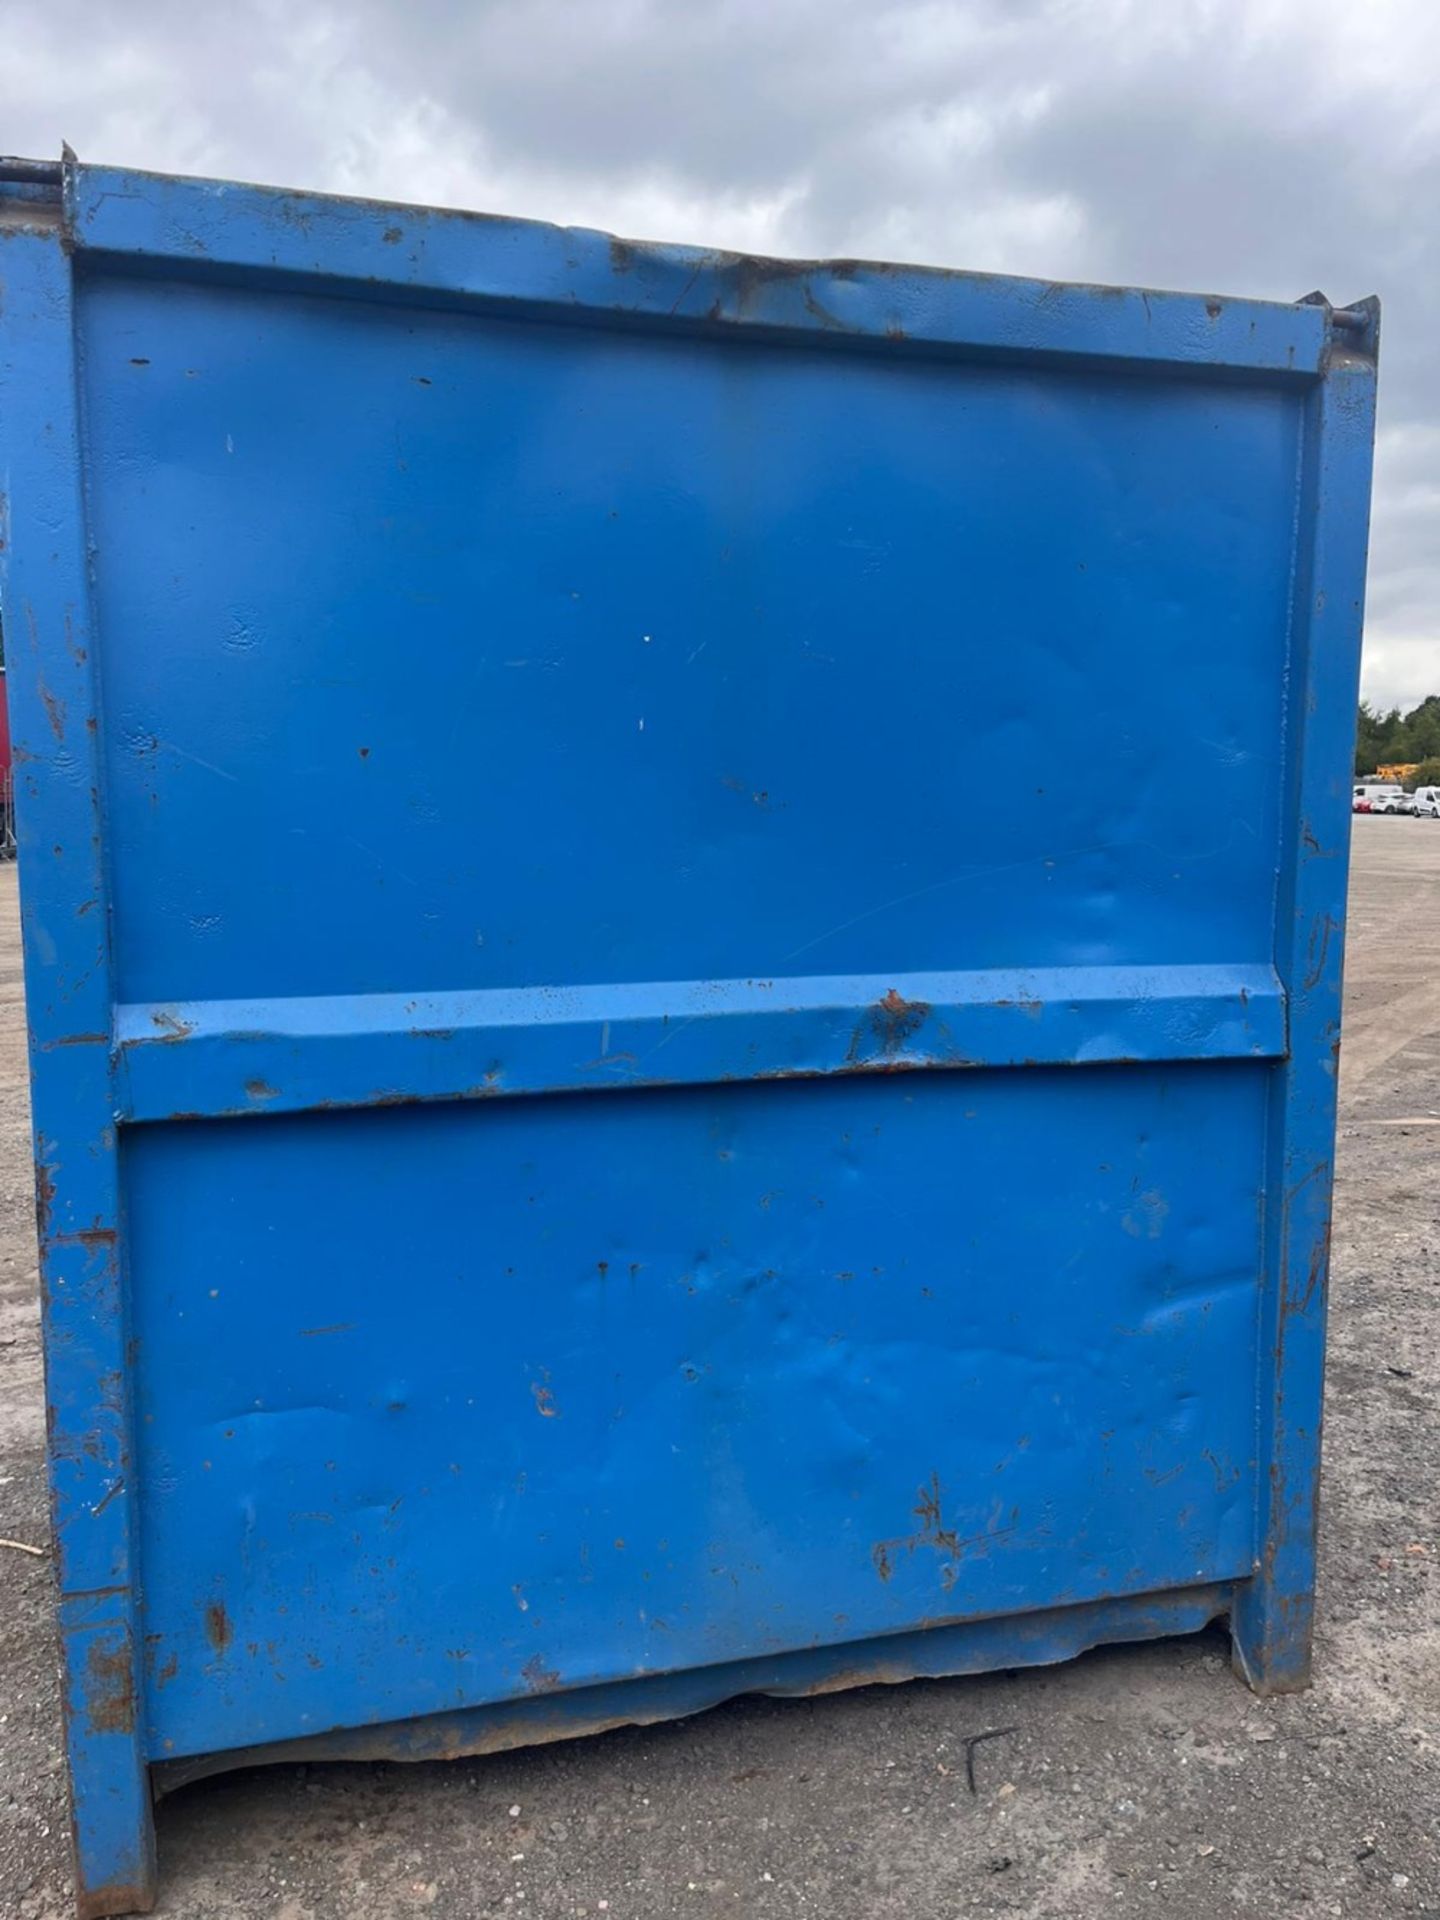 SECURE CHAIN LIFT STORAGE CONTAINER 3X1.75 METRE C.W KEY - Image 4 of 5